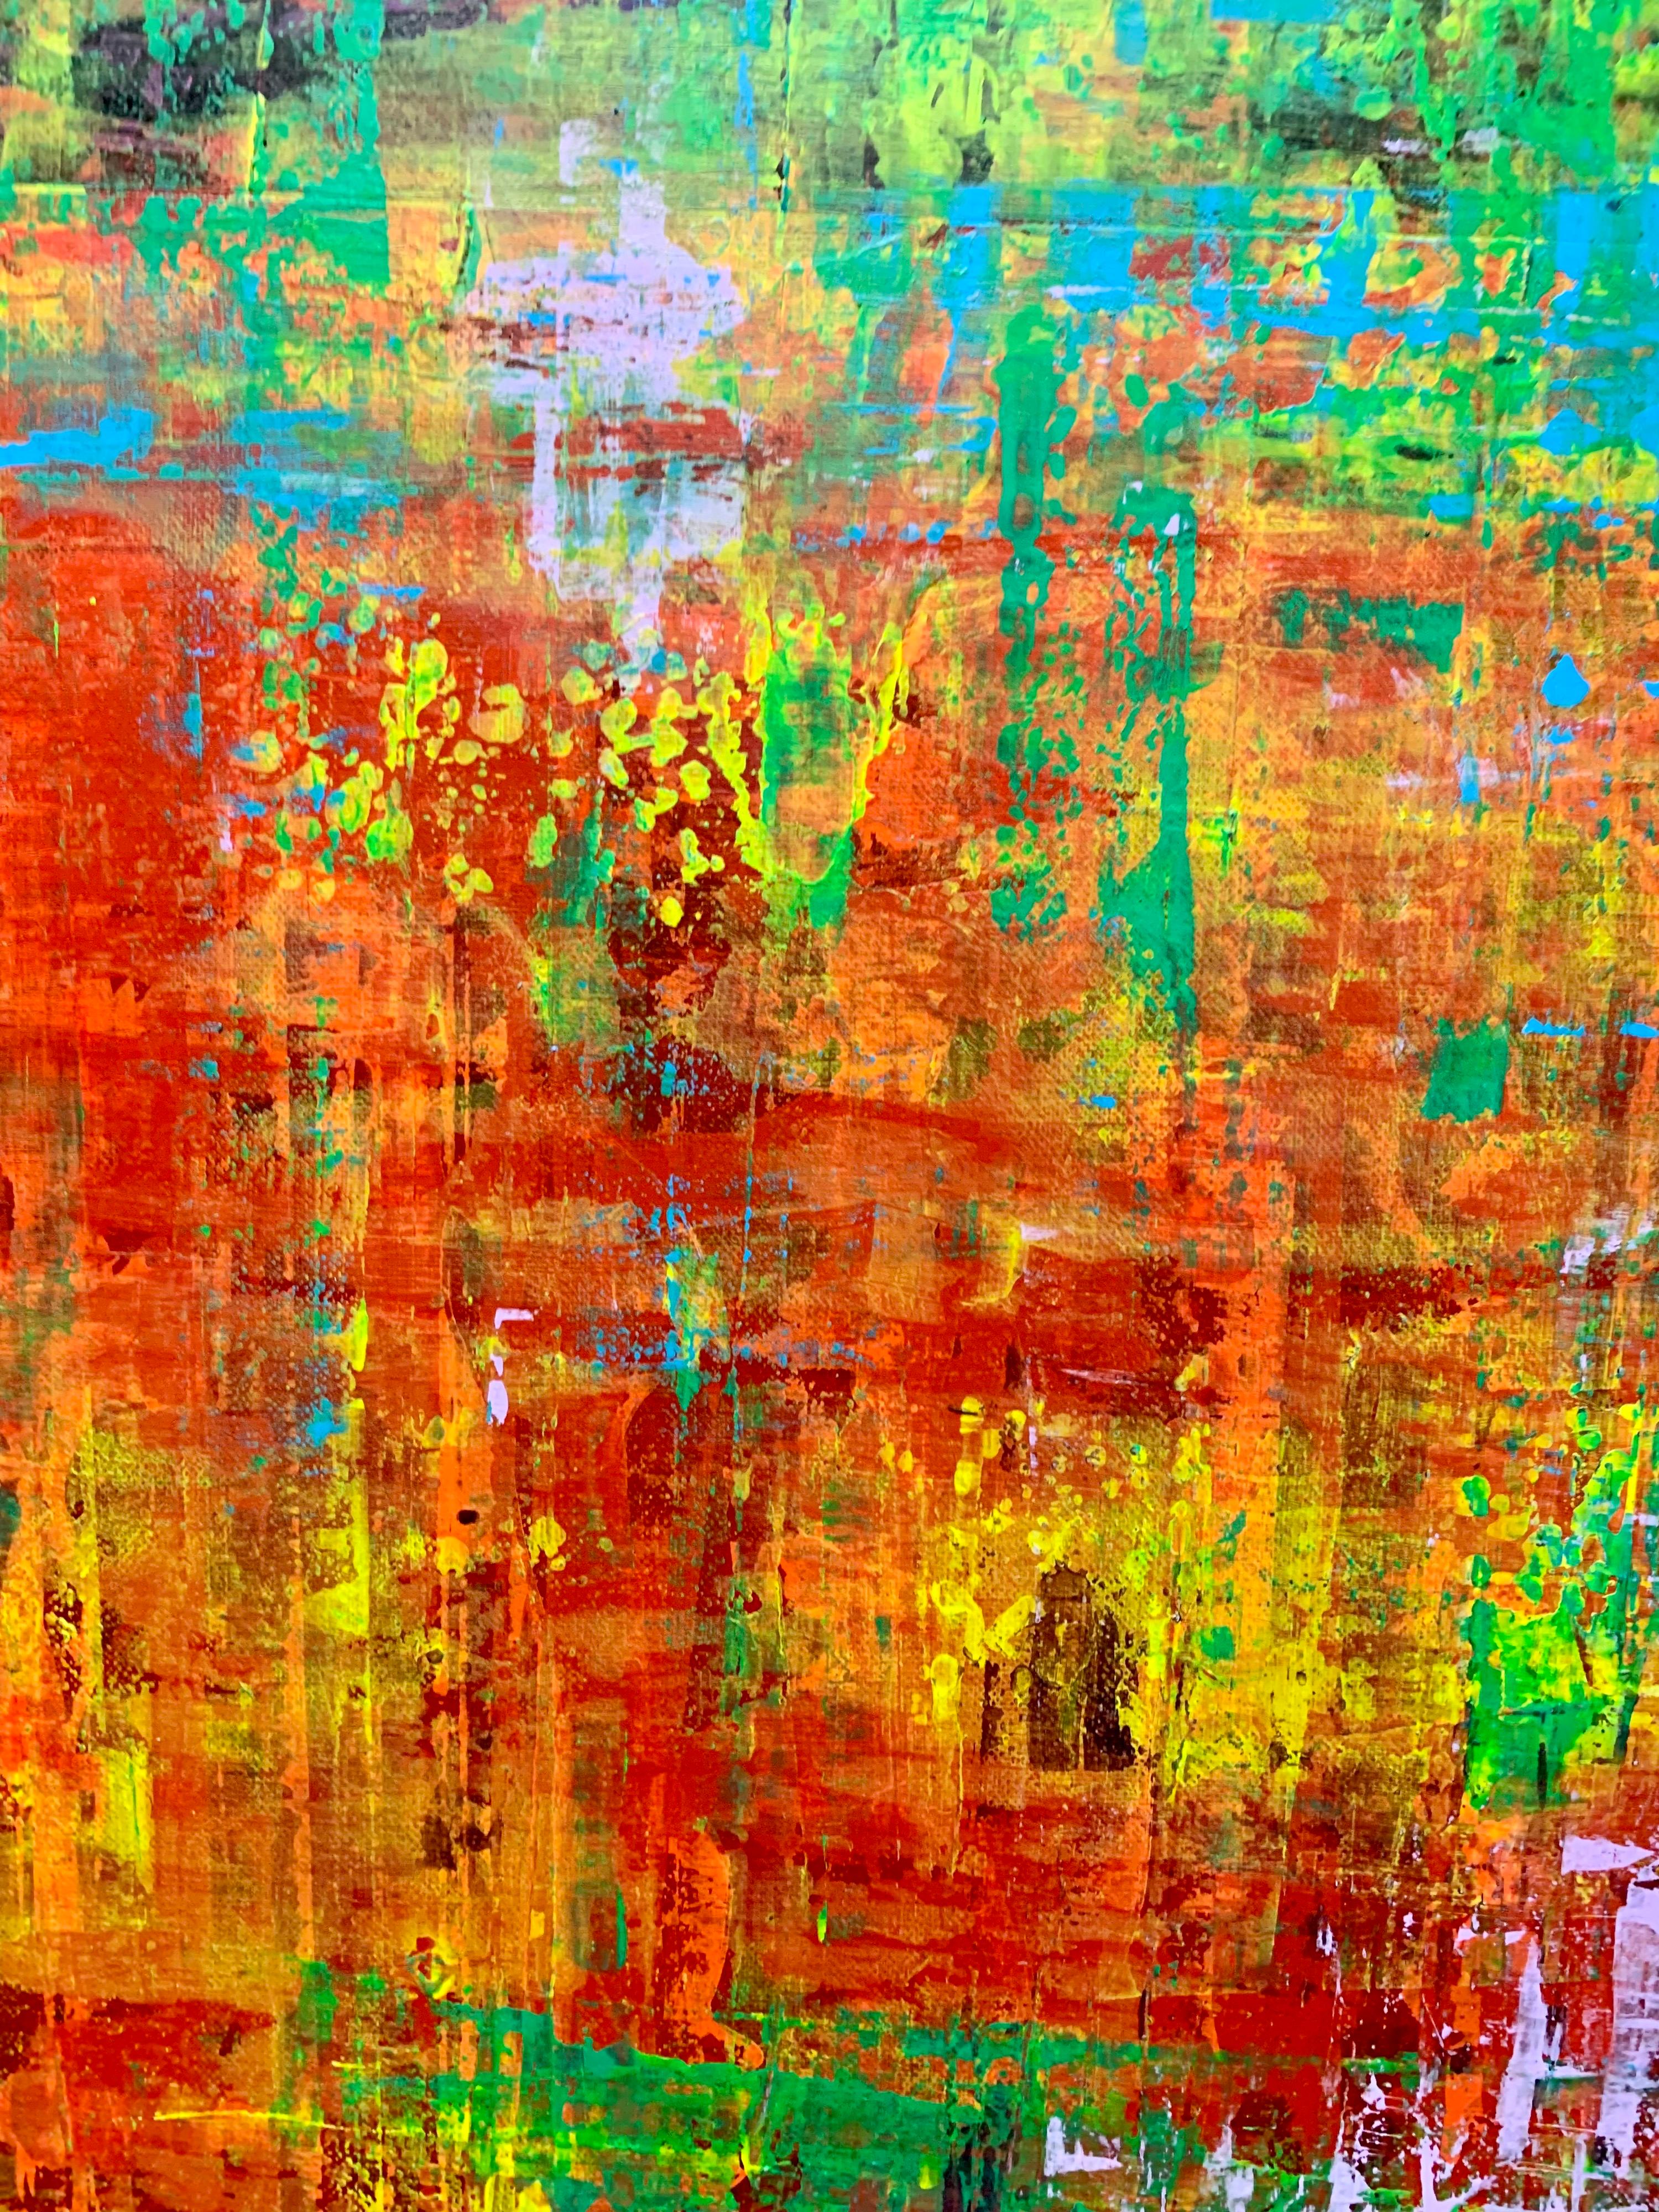 Large original signed abstract painting by American contemporary artist Arlene Carr. Features layers and layers of broad bright sweeps of color created with non brush techniques. Signed lower right AQC (Arlene Quintans Carr). Displayed in a giltwood